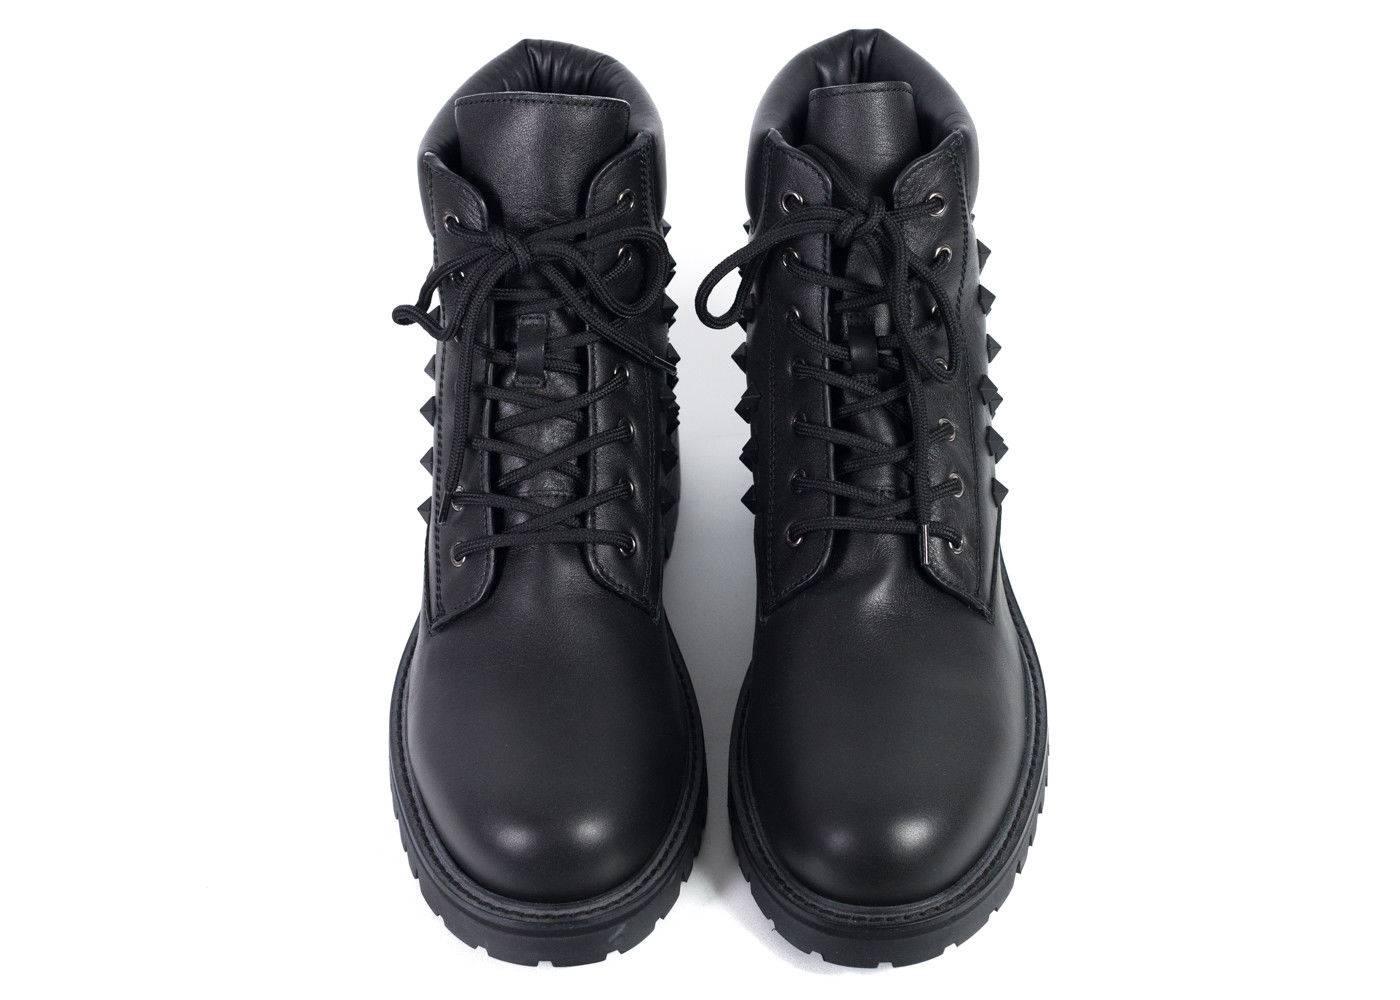 Brand New Valentino Men's Combat Boots
Original Box & Dust Bag Included
Retails in Stores & Online for $1345
Size IT40.5 / US7.5 Fits True to Size

Valentino's rendition of a classic black combat boot with their house's signature rocketed